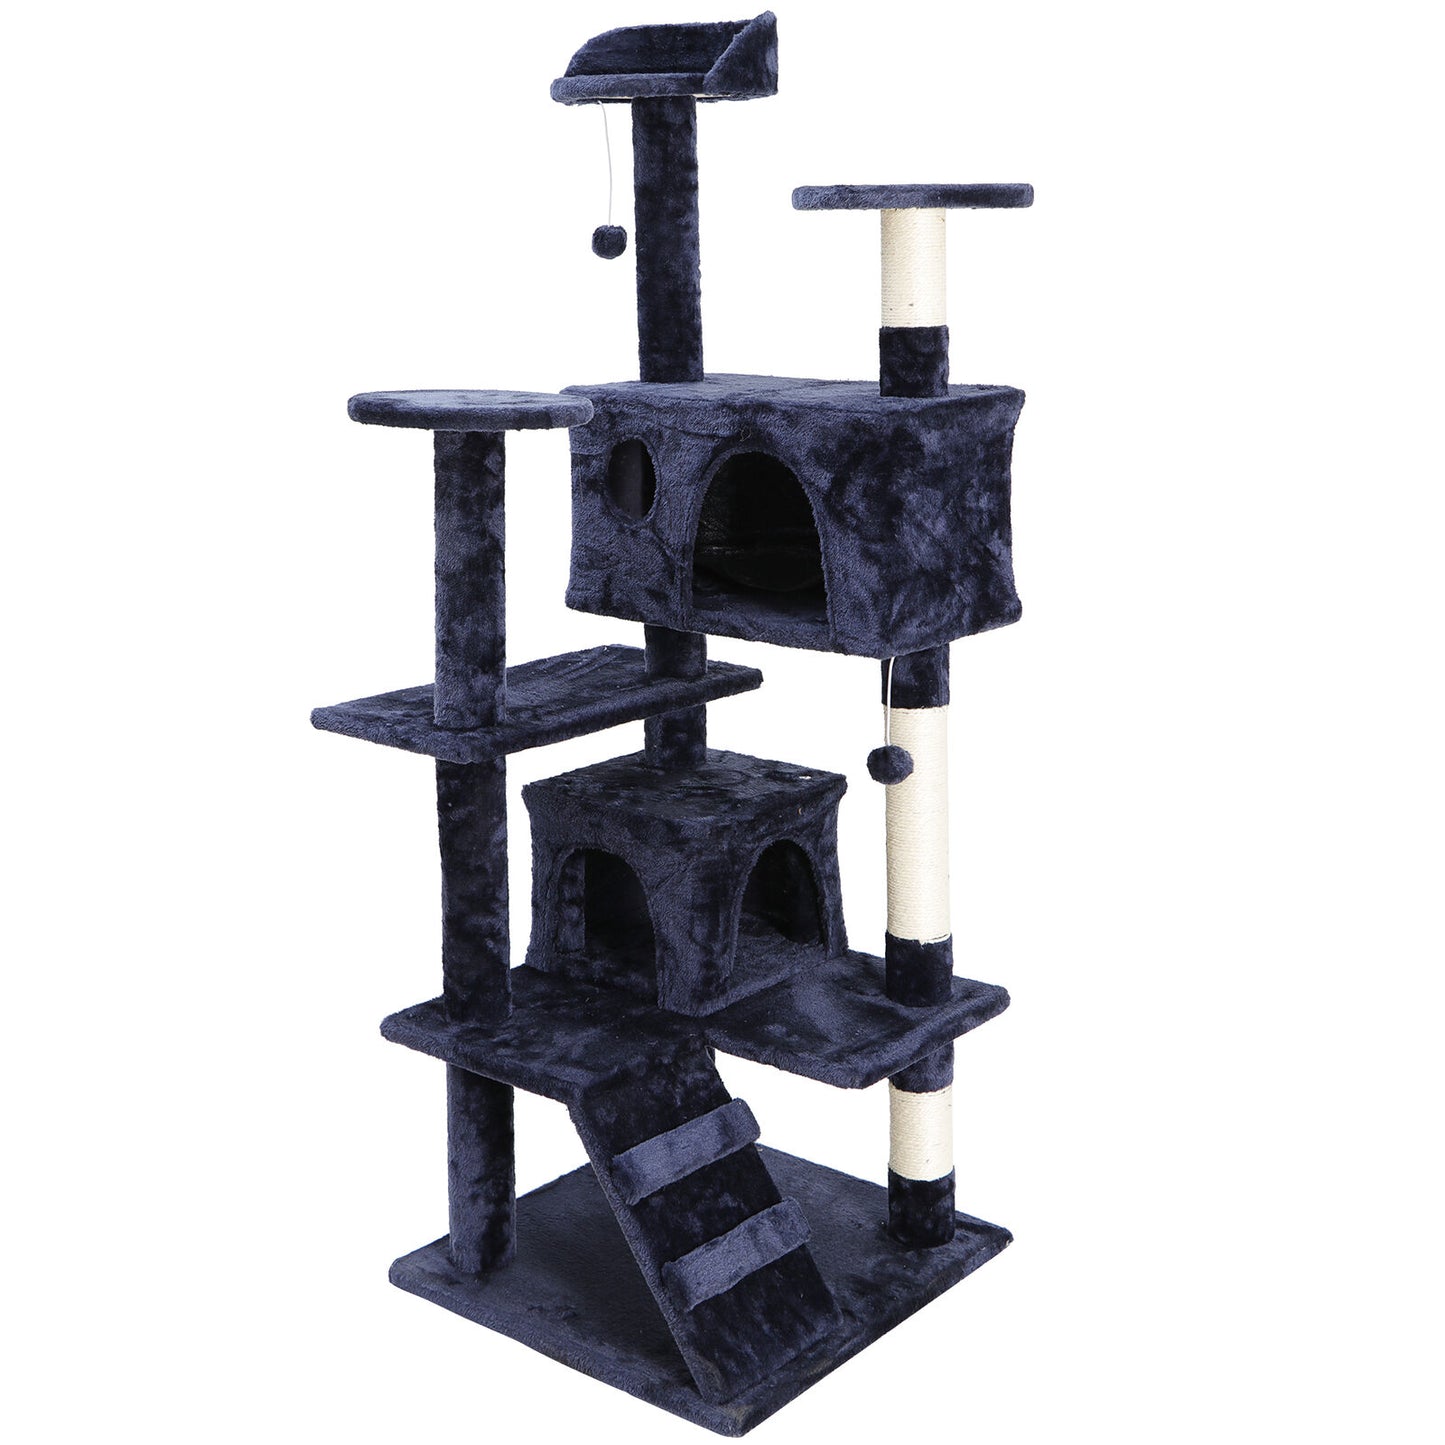 53" Sturdy Cat Tree Activity Tower Kitty Multilevel w/Padded Viewing Perch Blue